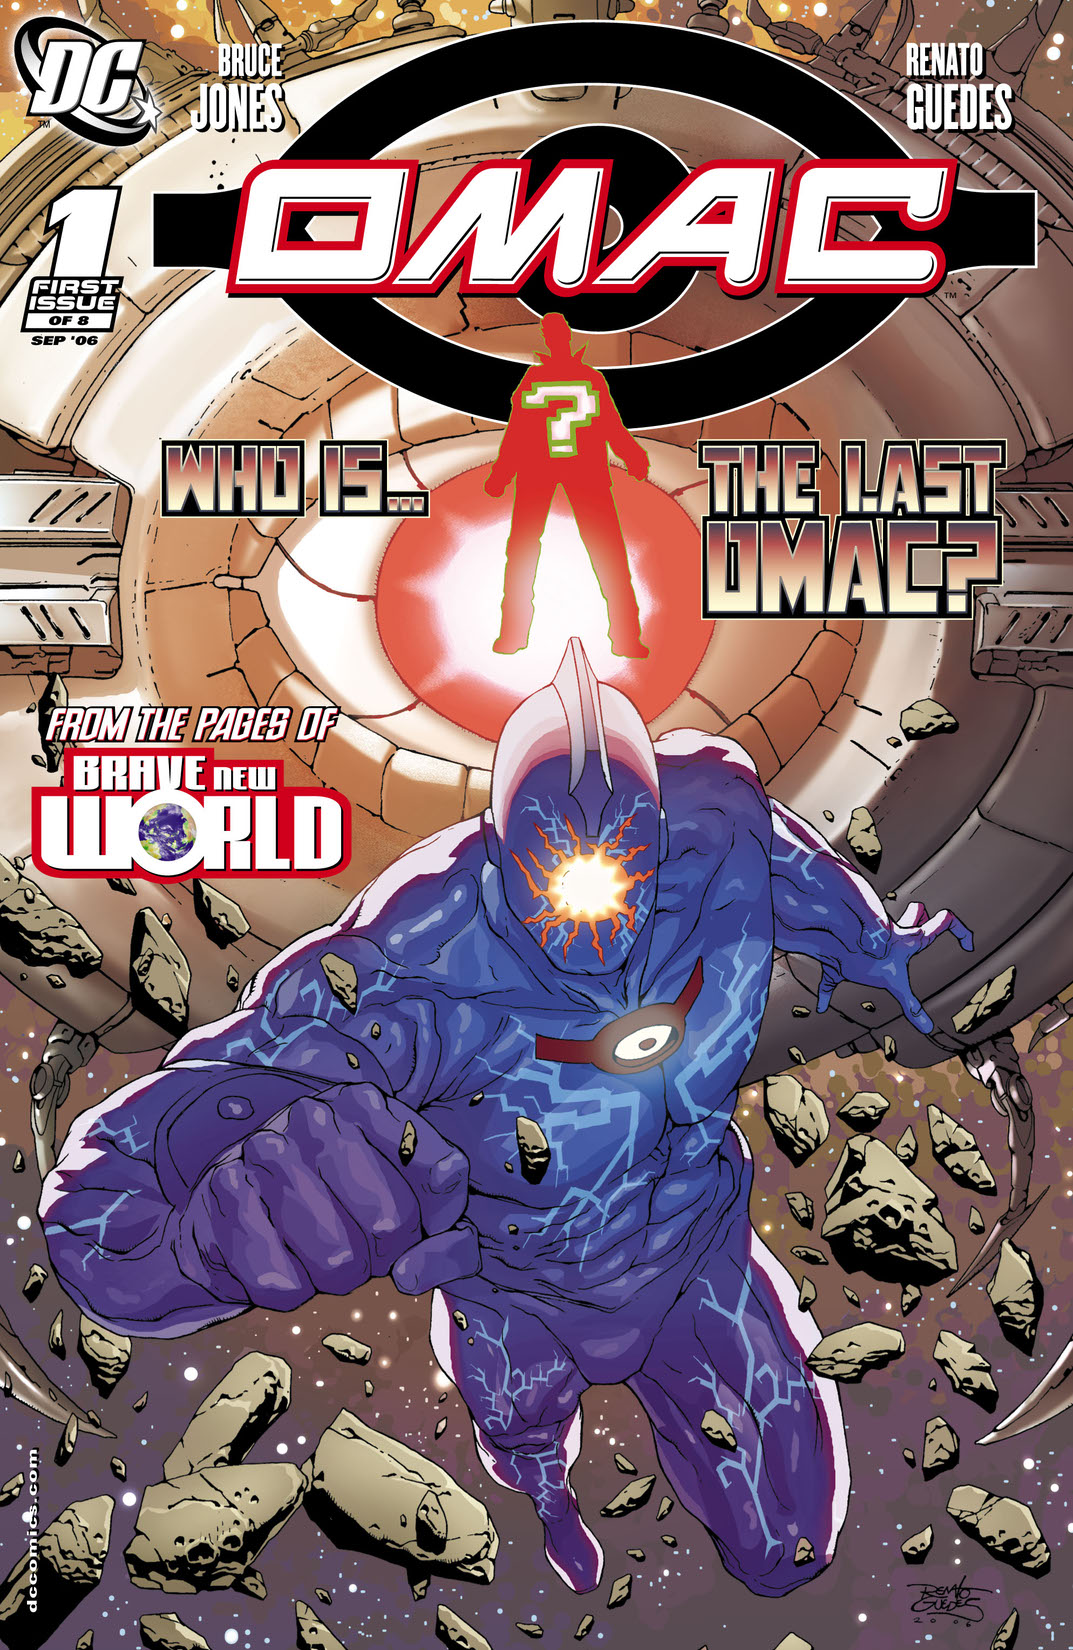 OMAC (2006-) #1 preview images